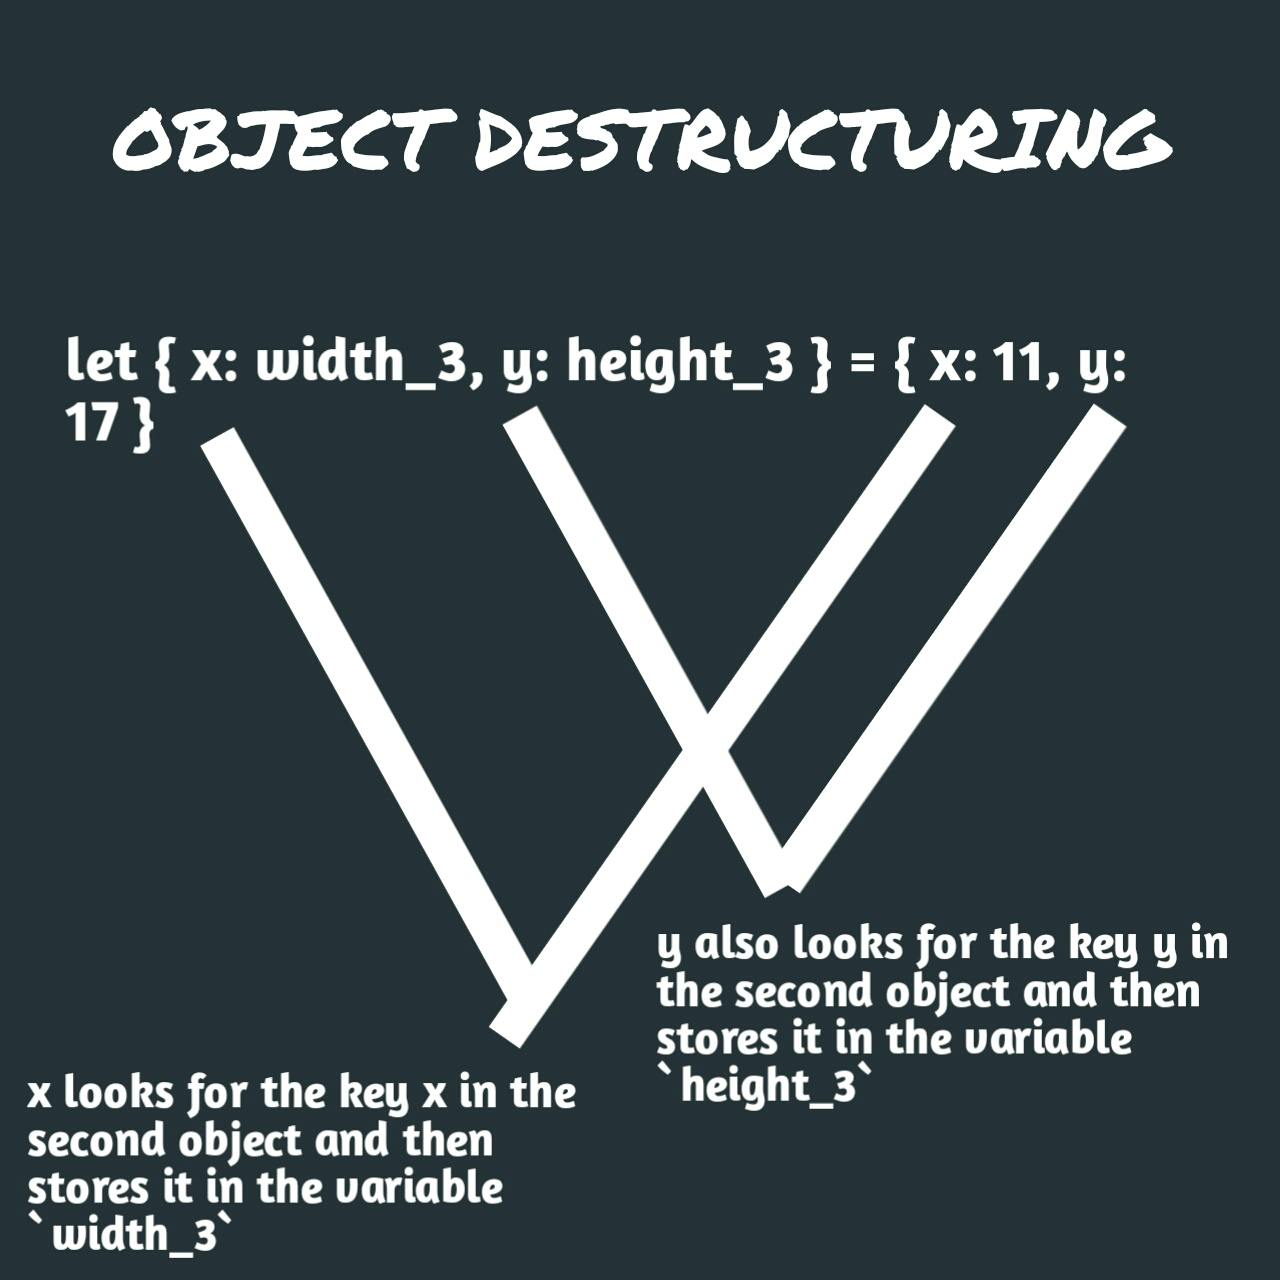 Image illustrating the process of using new variable names when destructuring objects